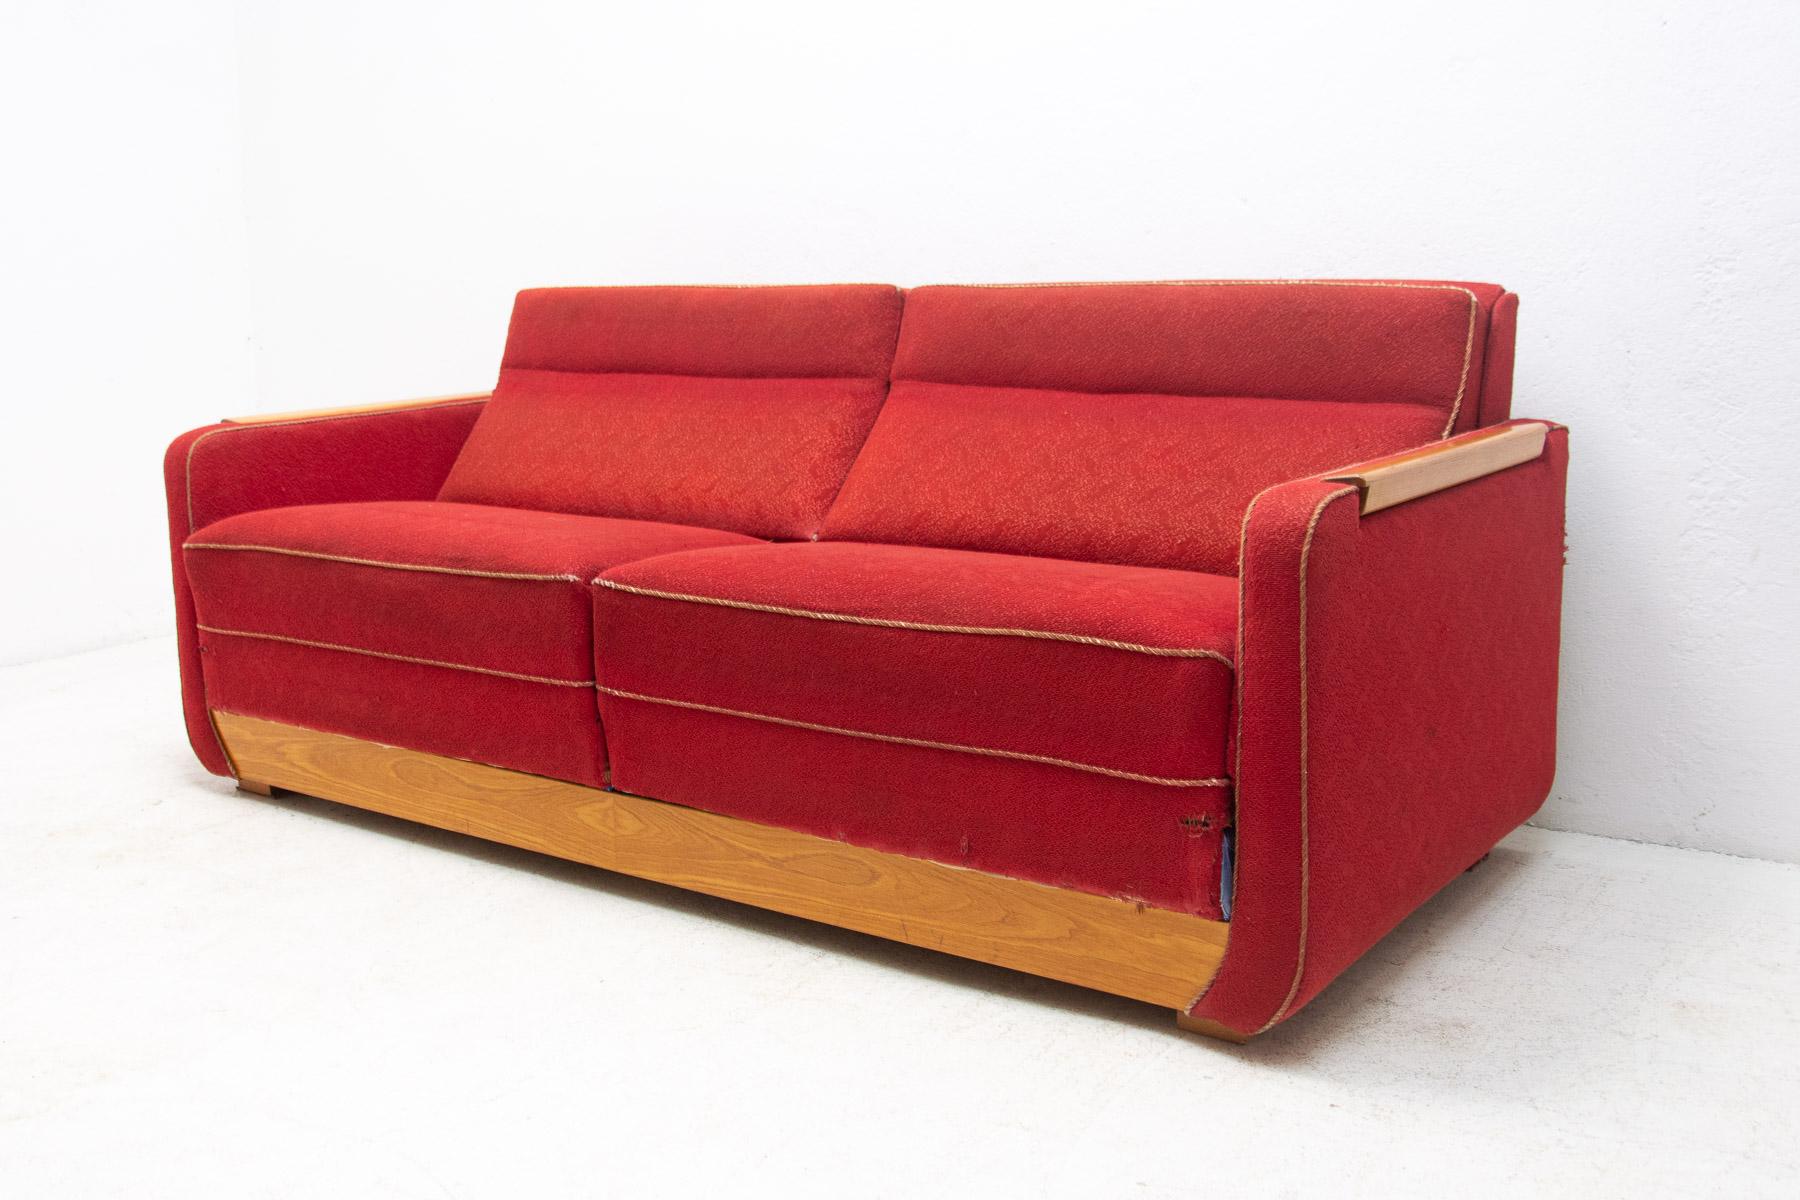 Fully upholstered modernist sofa with pull-out tables, 1950's.
This sofa was made in the 1950s in the former Czechoslovakia, it bears the hallmarks of Jindrich Halabala’s work, but it could also be by another author.
On the sides, it has